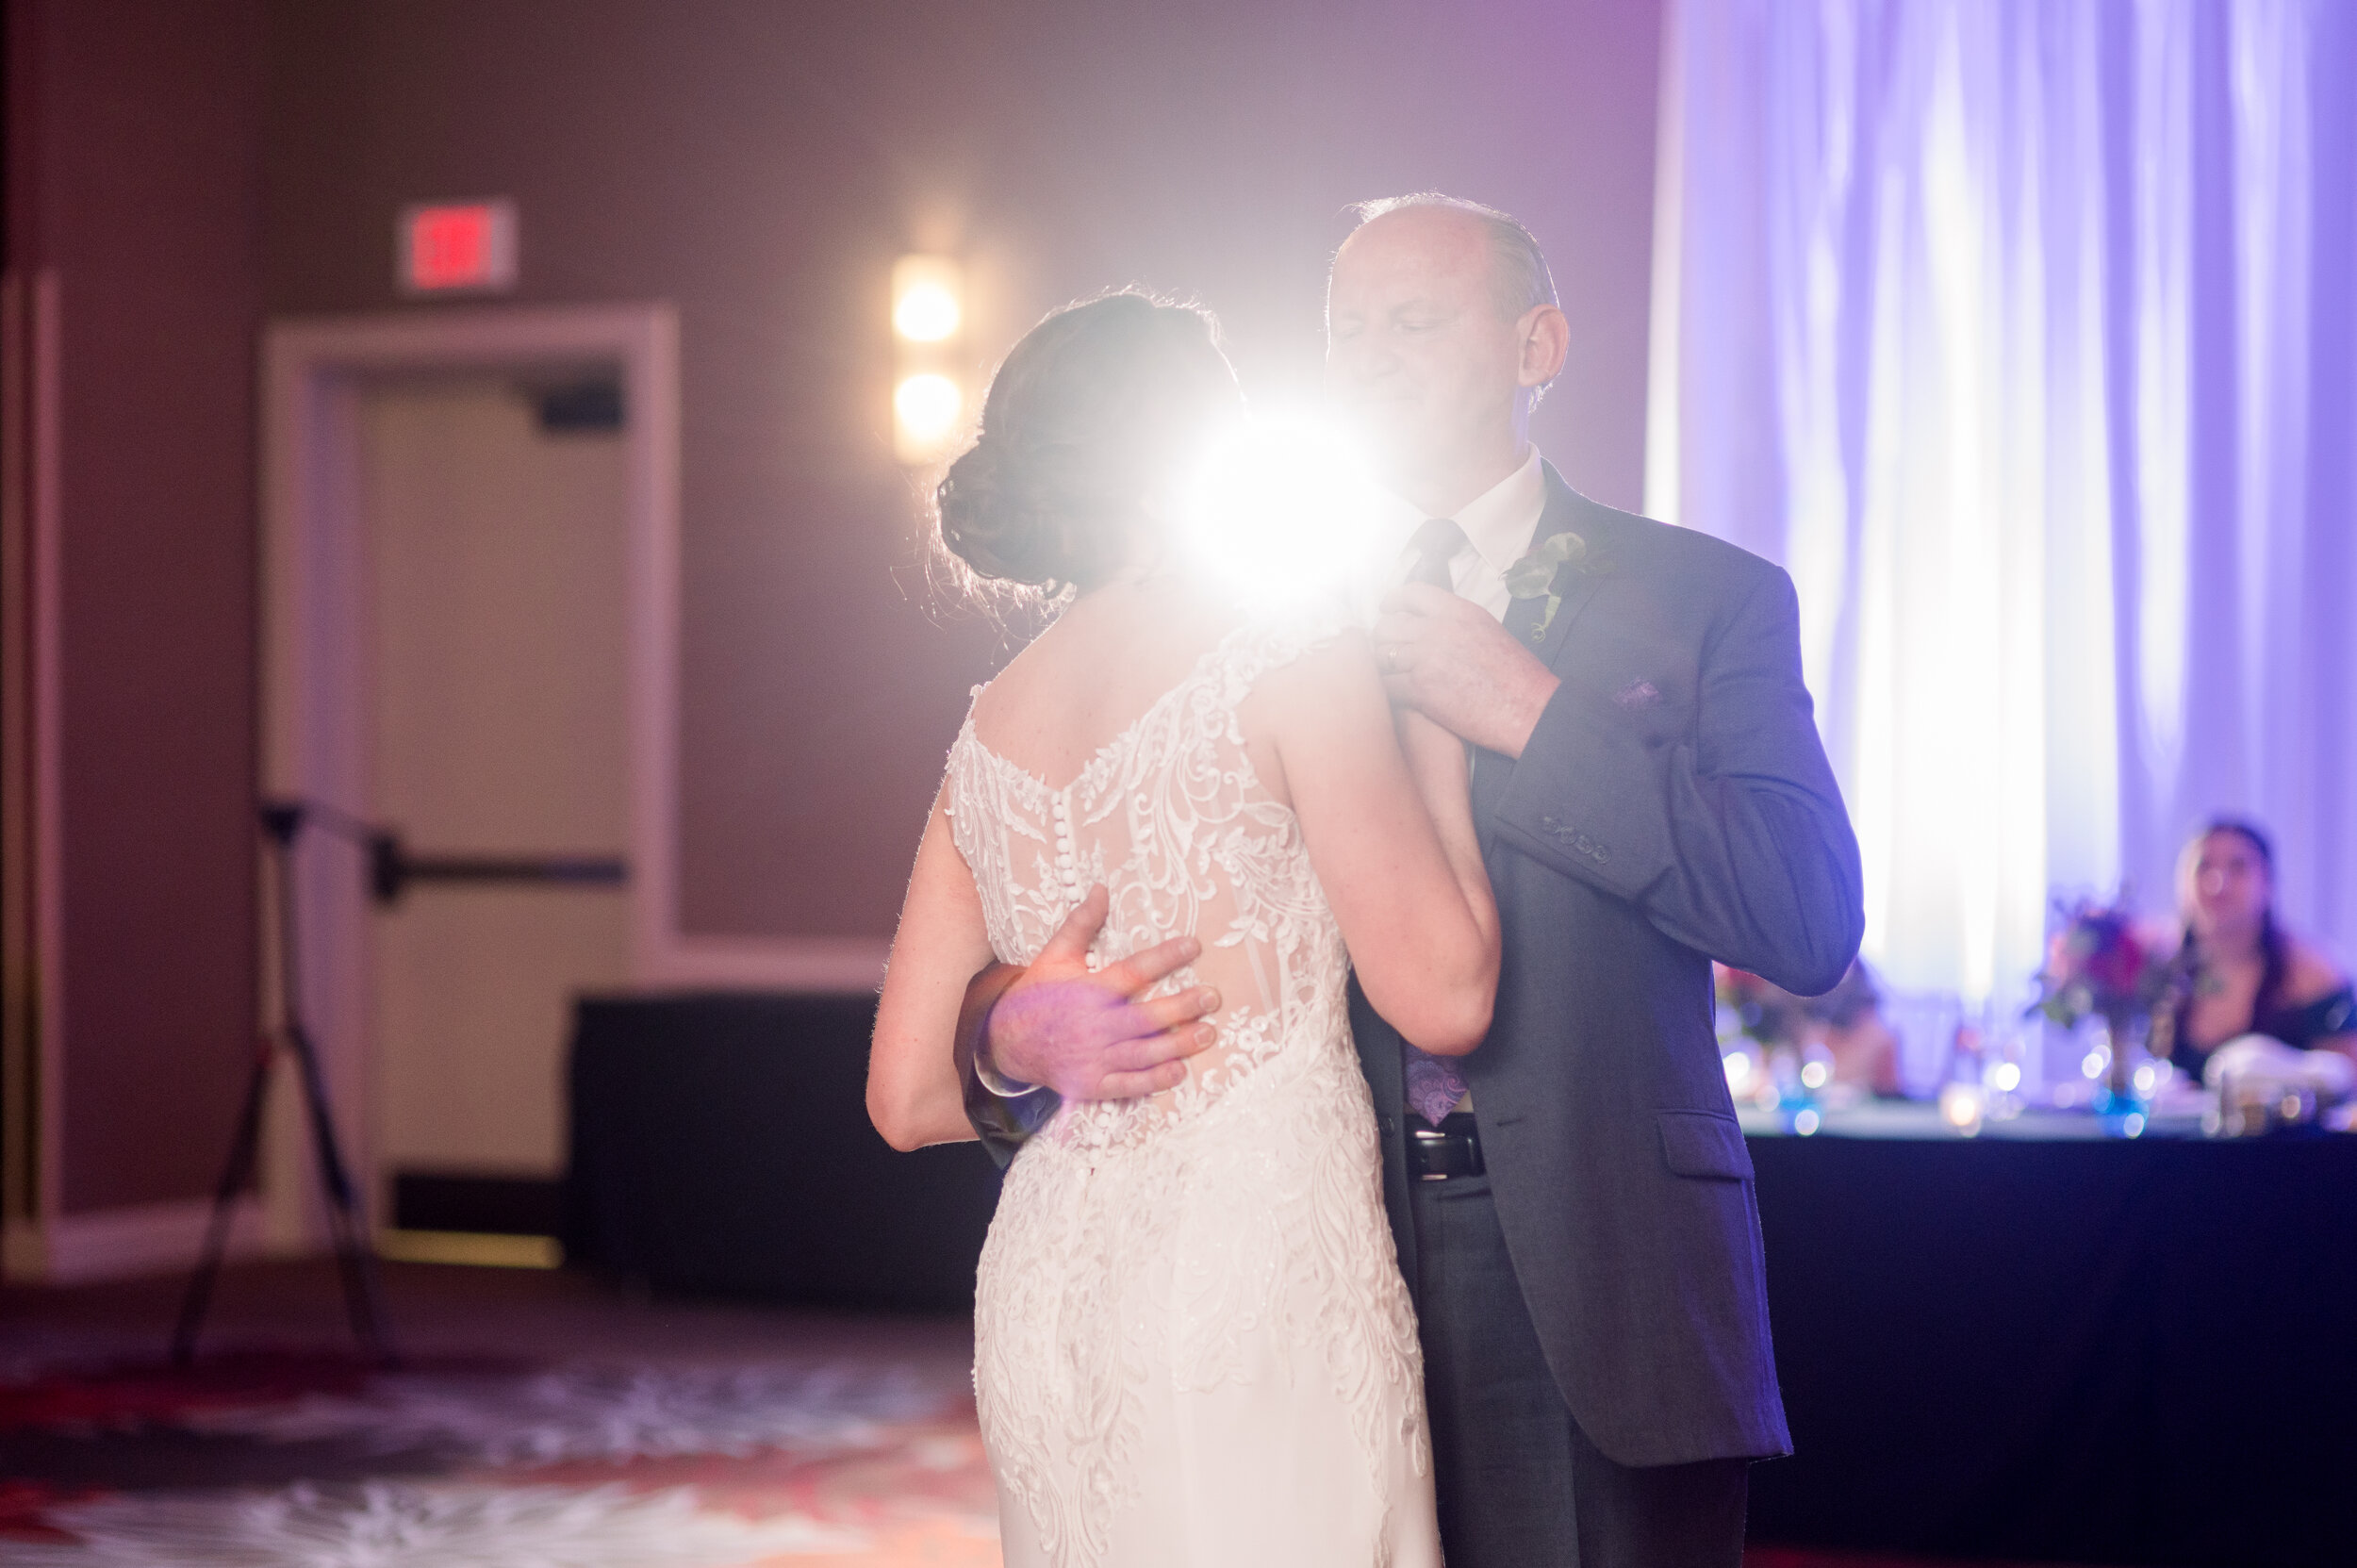 Weddings-at-The-DoubleTree-by-Hilton-Hotel-Pittsburgh-Ashley-Reed-Photography-66.jpg